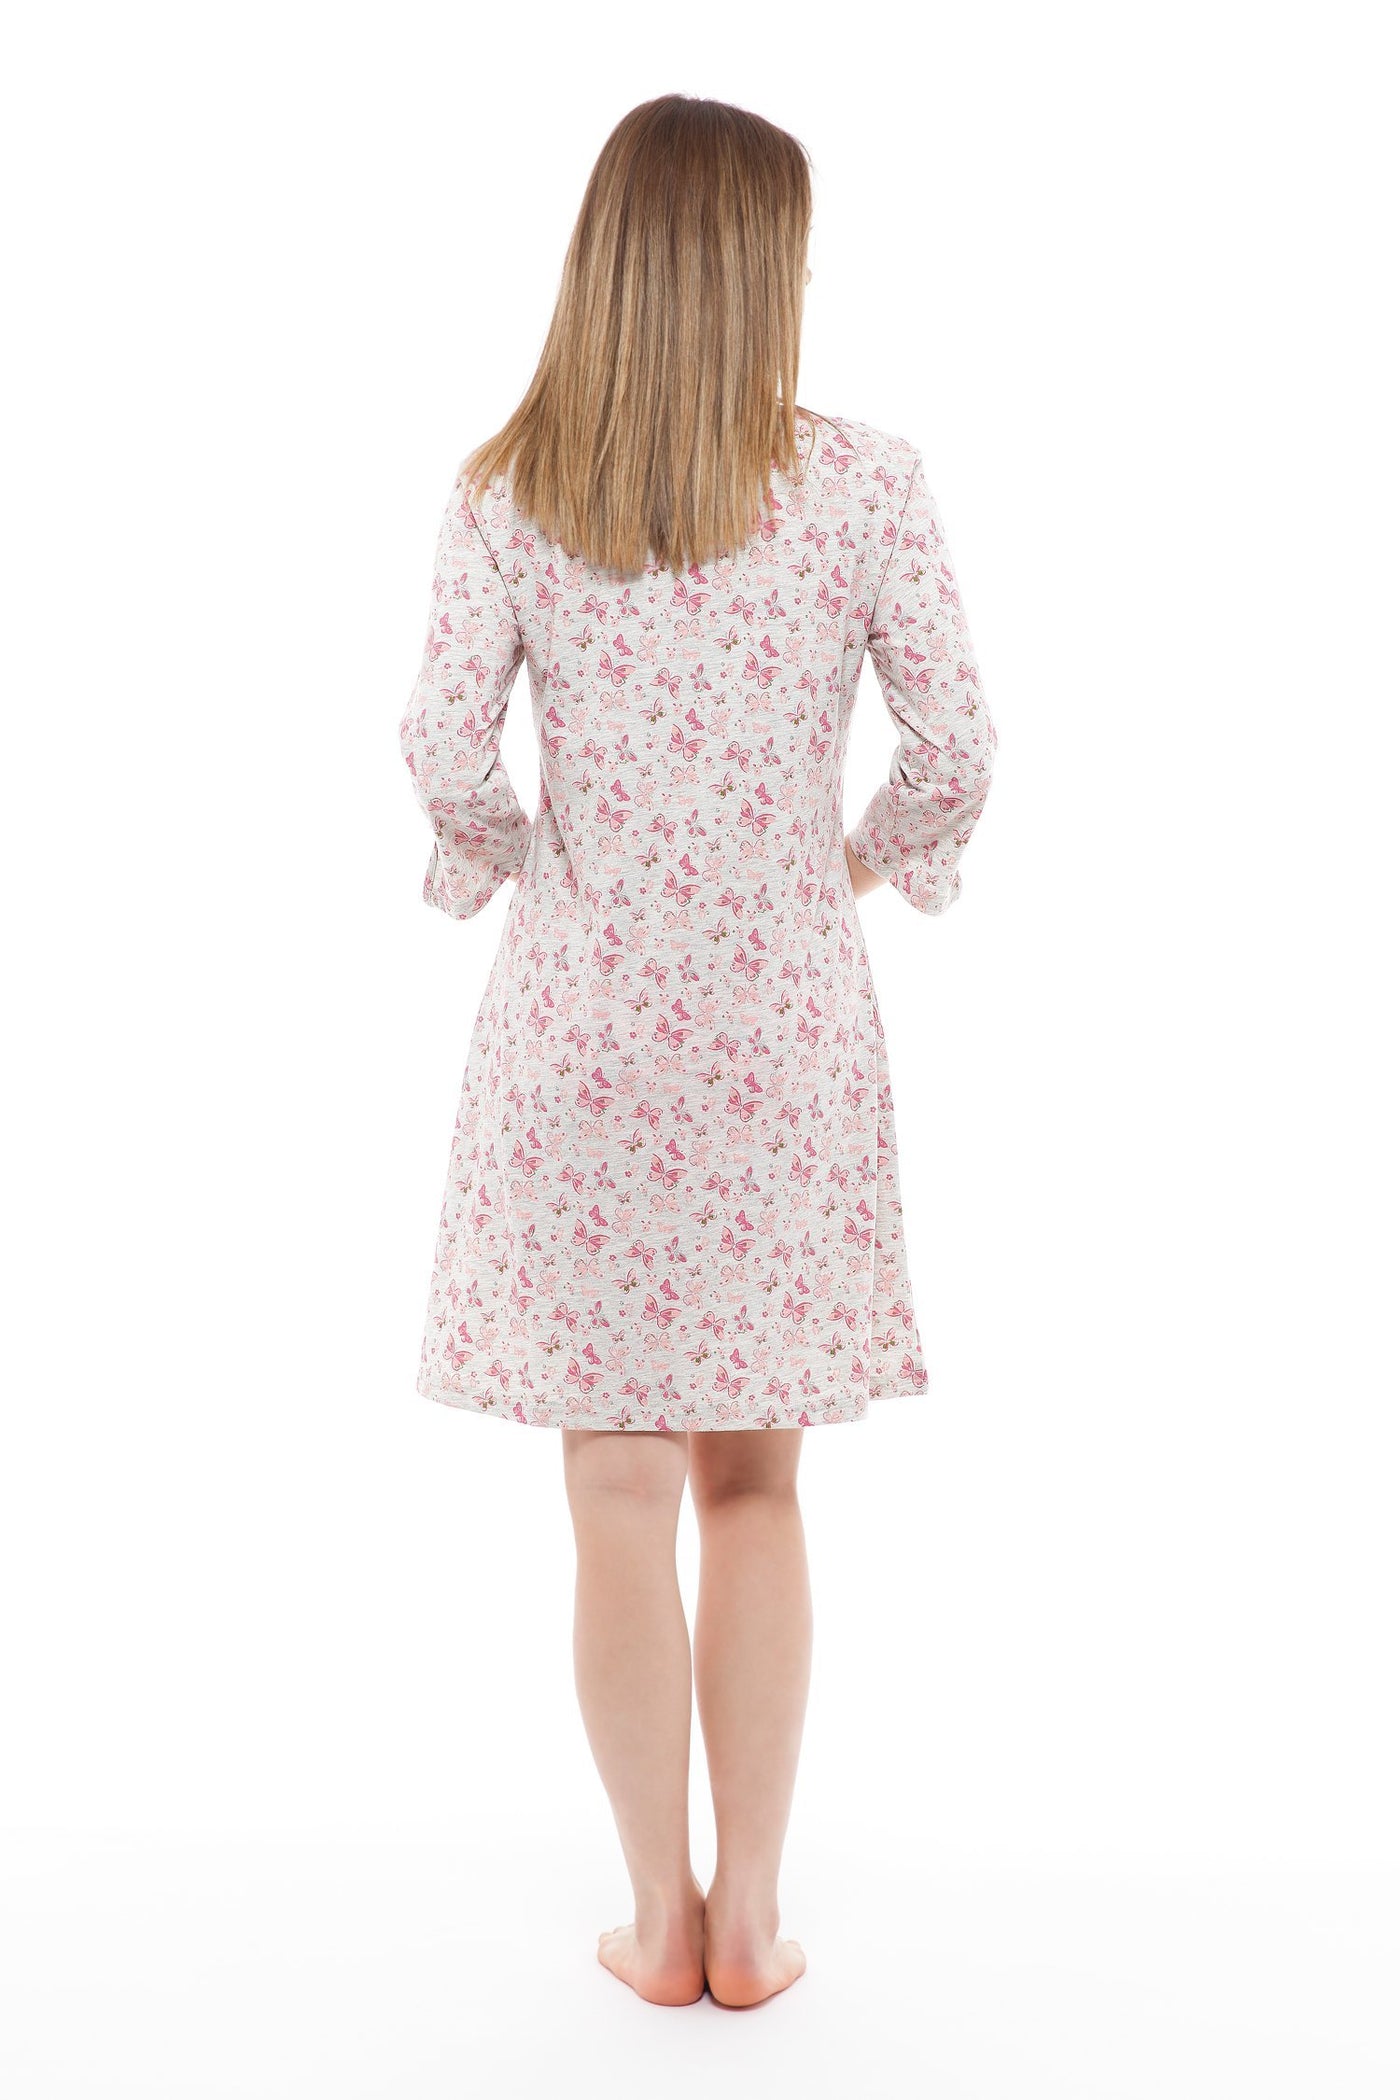 chassca happiness is... 3/4 sleeve nightdress - Breakmood